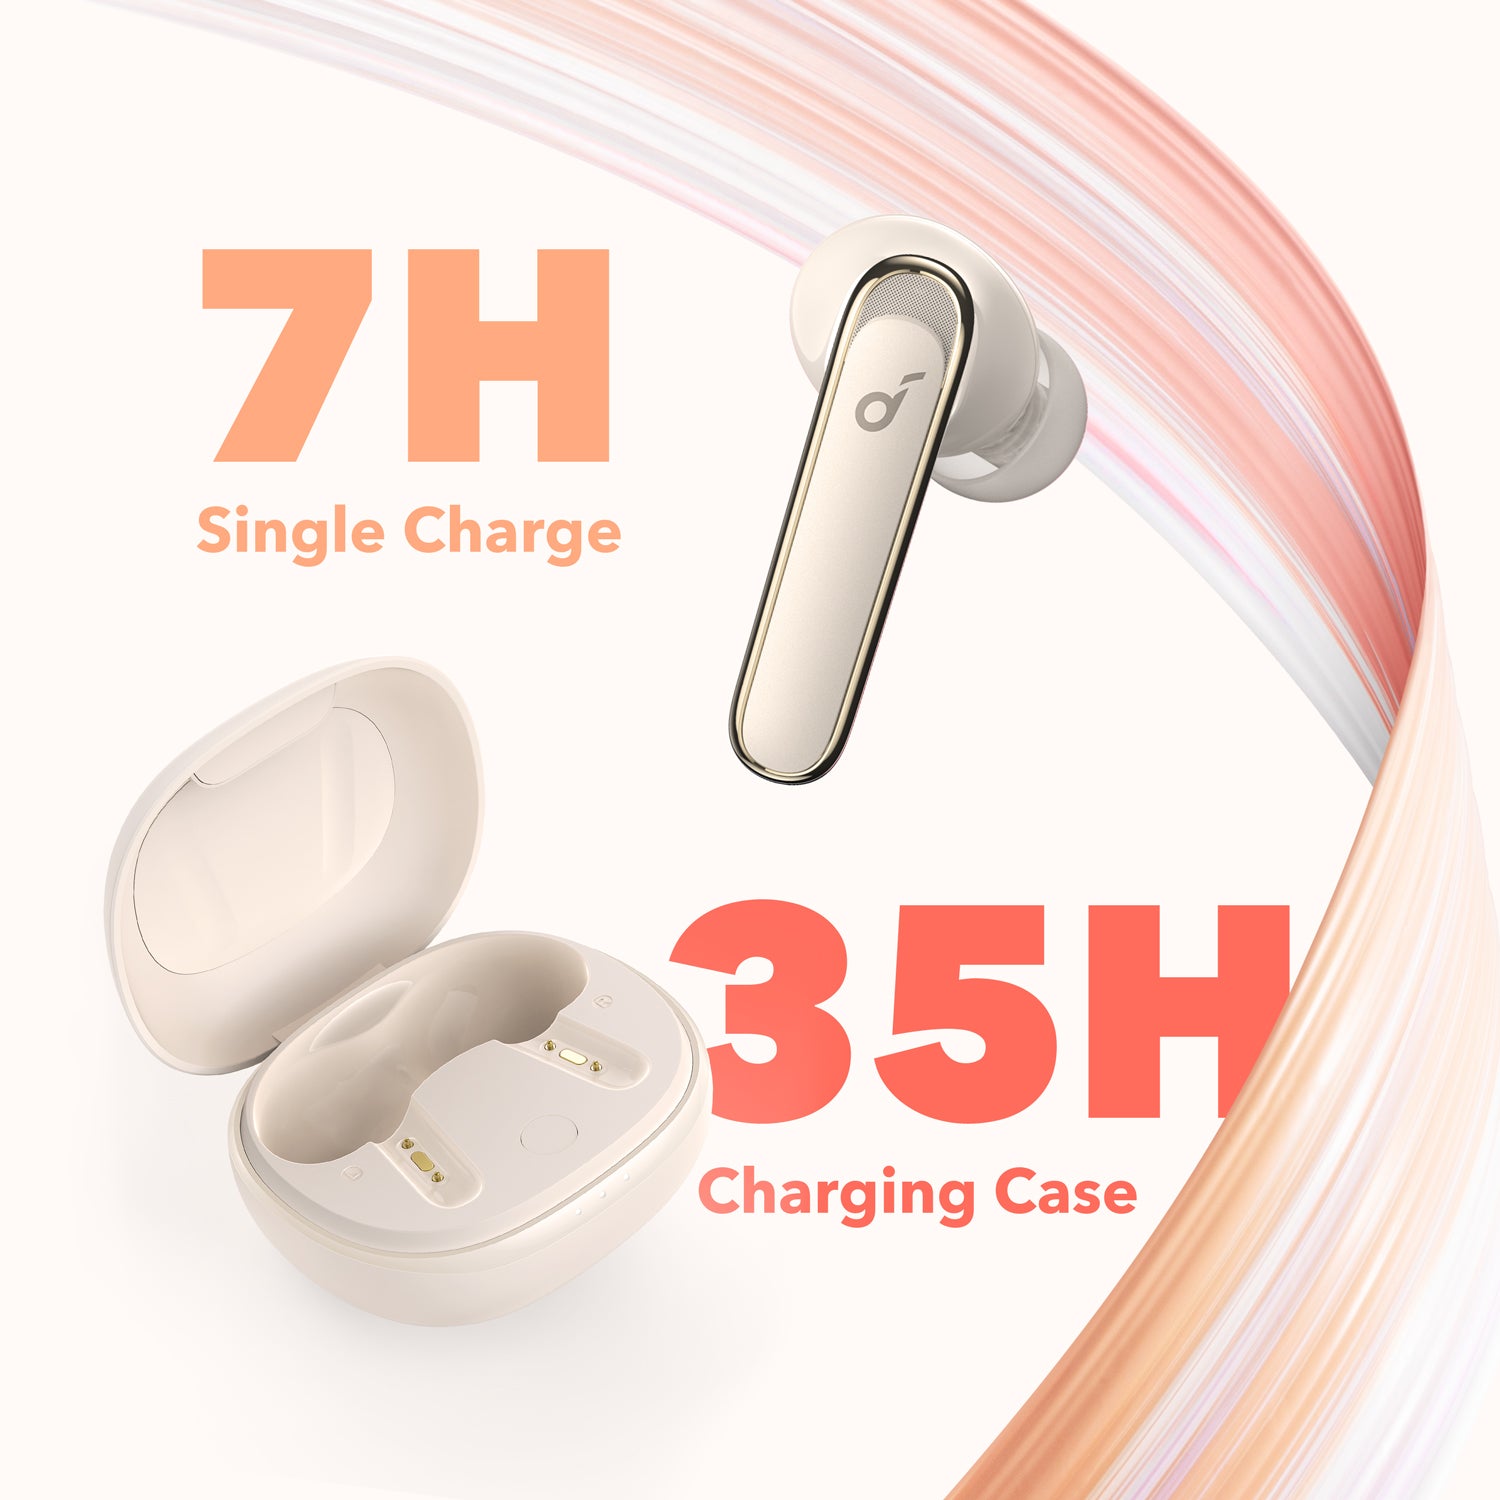 Anker expands Soundcore lineup with new Life P3 ANC earbuds in 5 colors